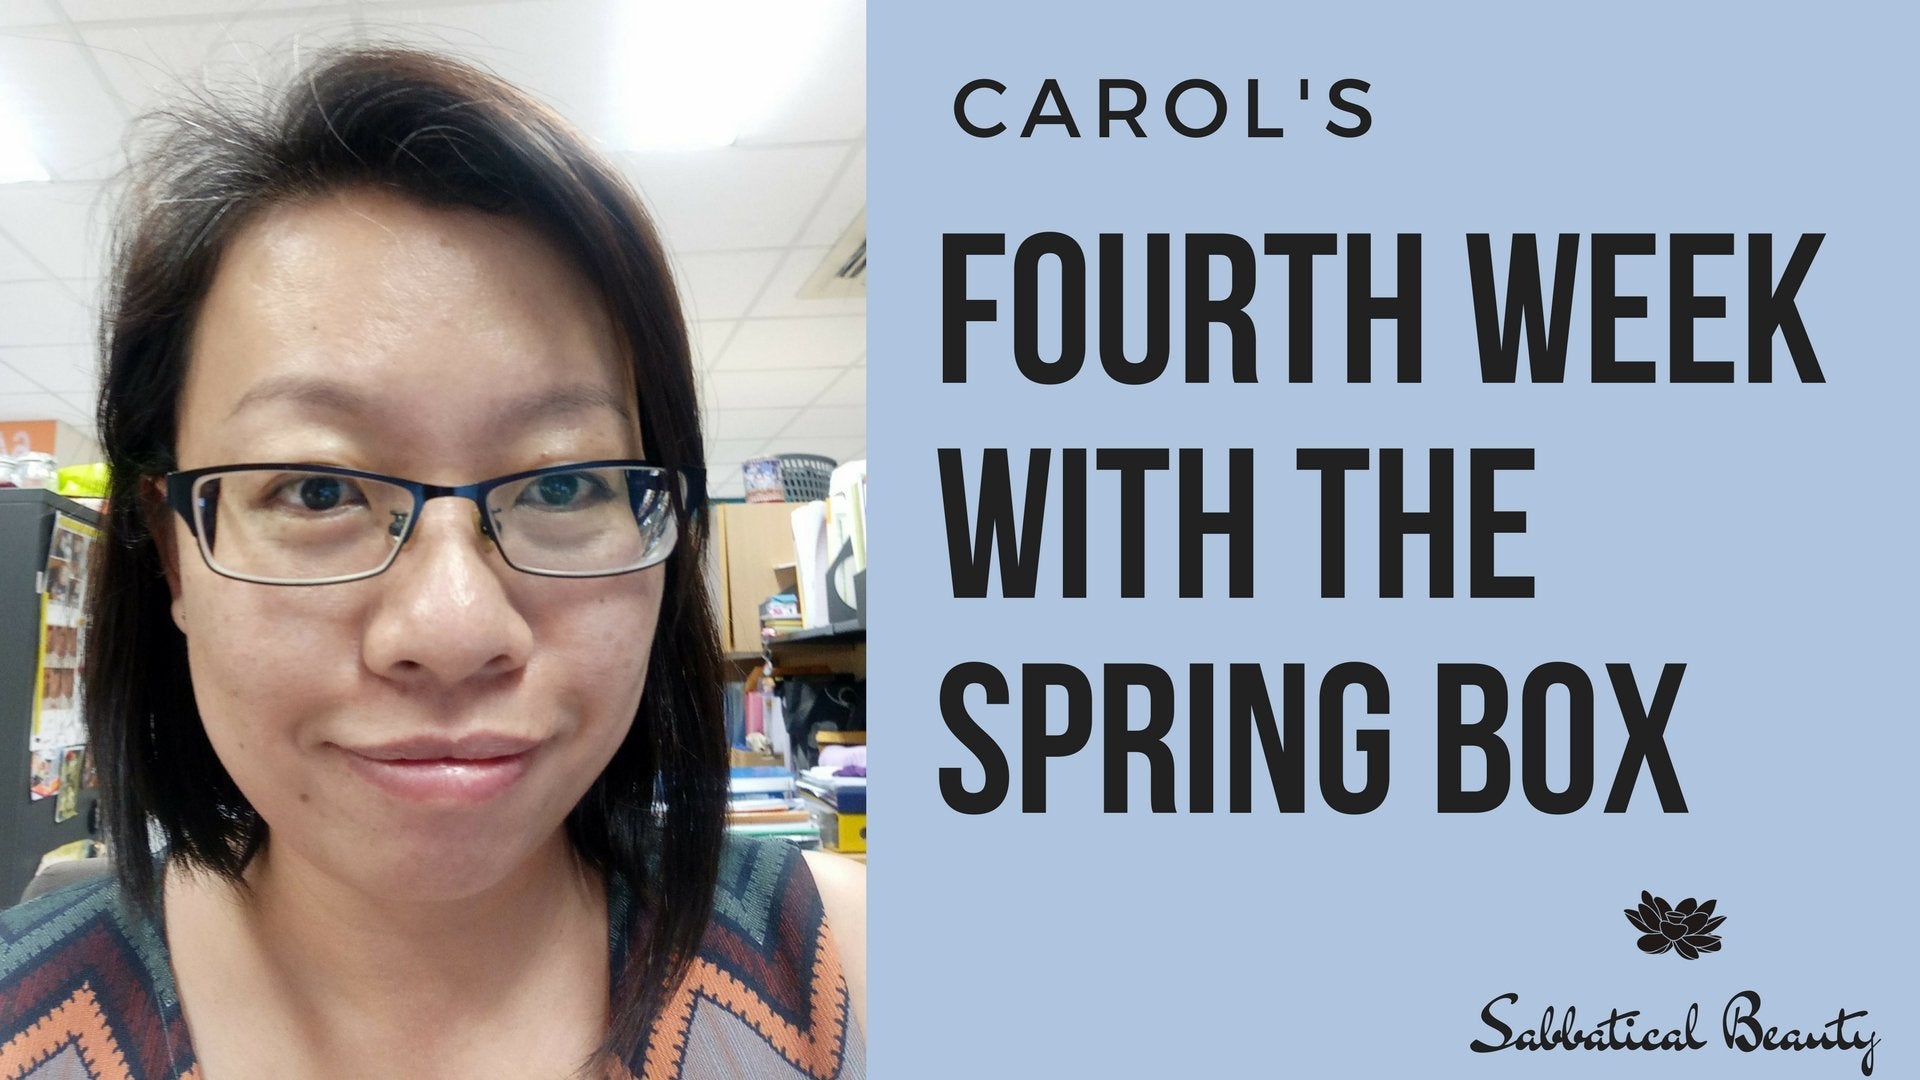 Carol's Fourth Week With the Spring Box - Sabbatical Beauty